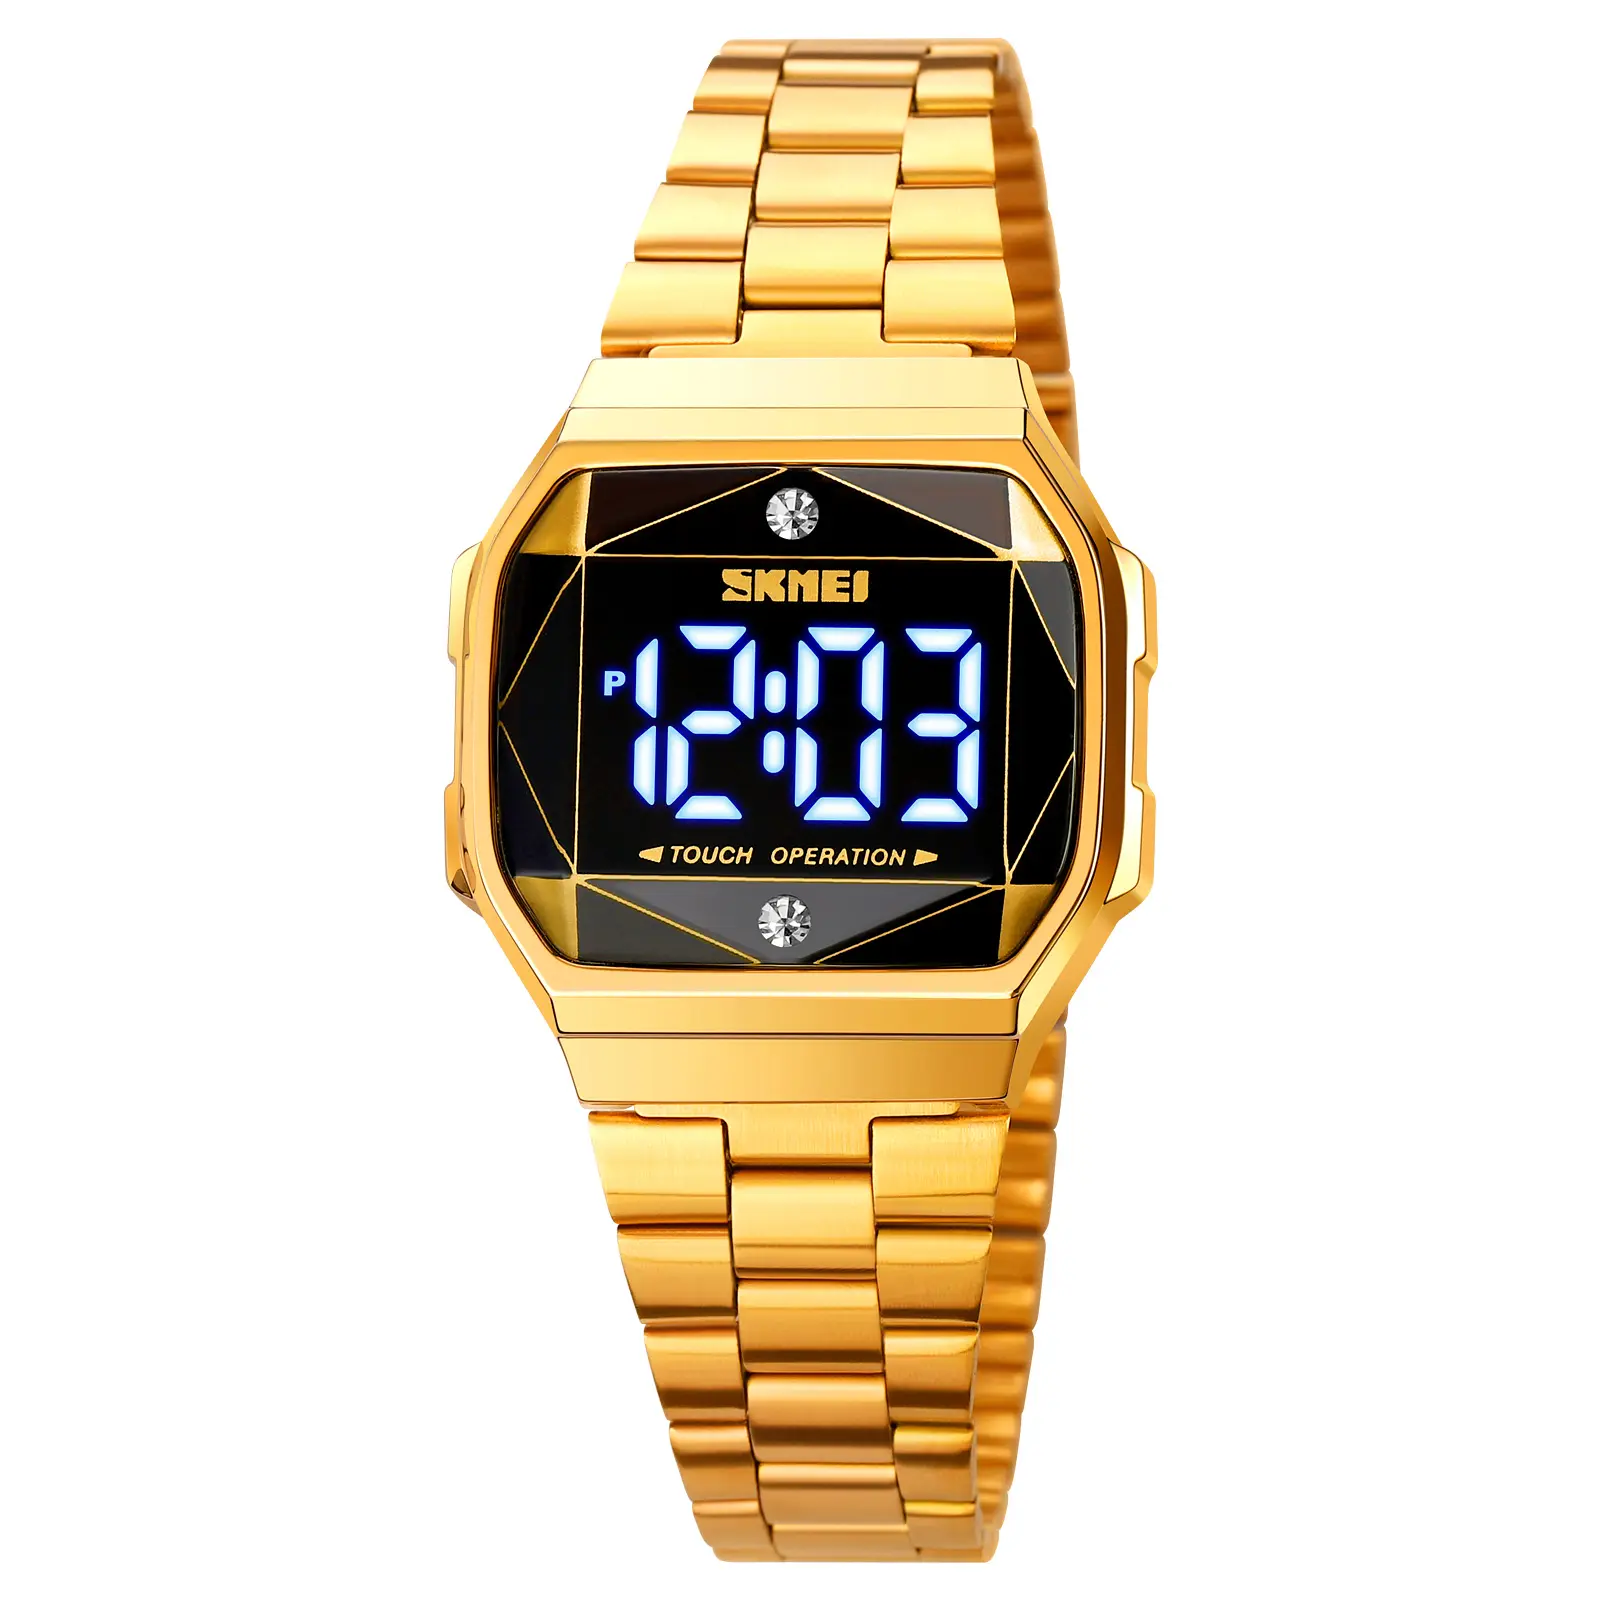 New Arrive For Small Wrist Fashion Ladies Women LED Touch Screen Waterproof Digital Watches